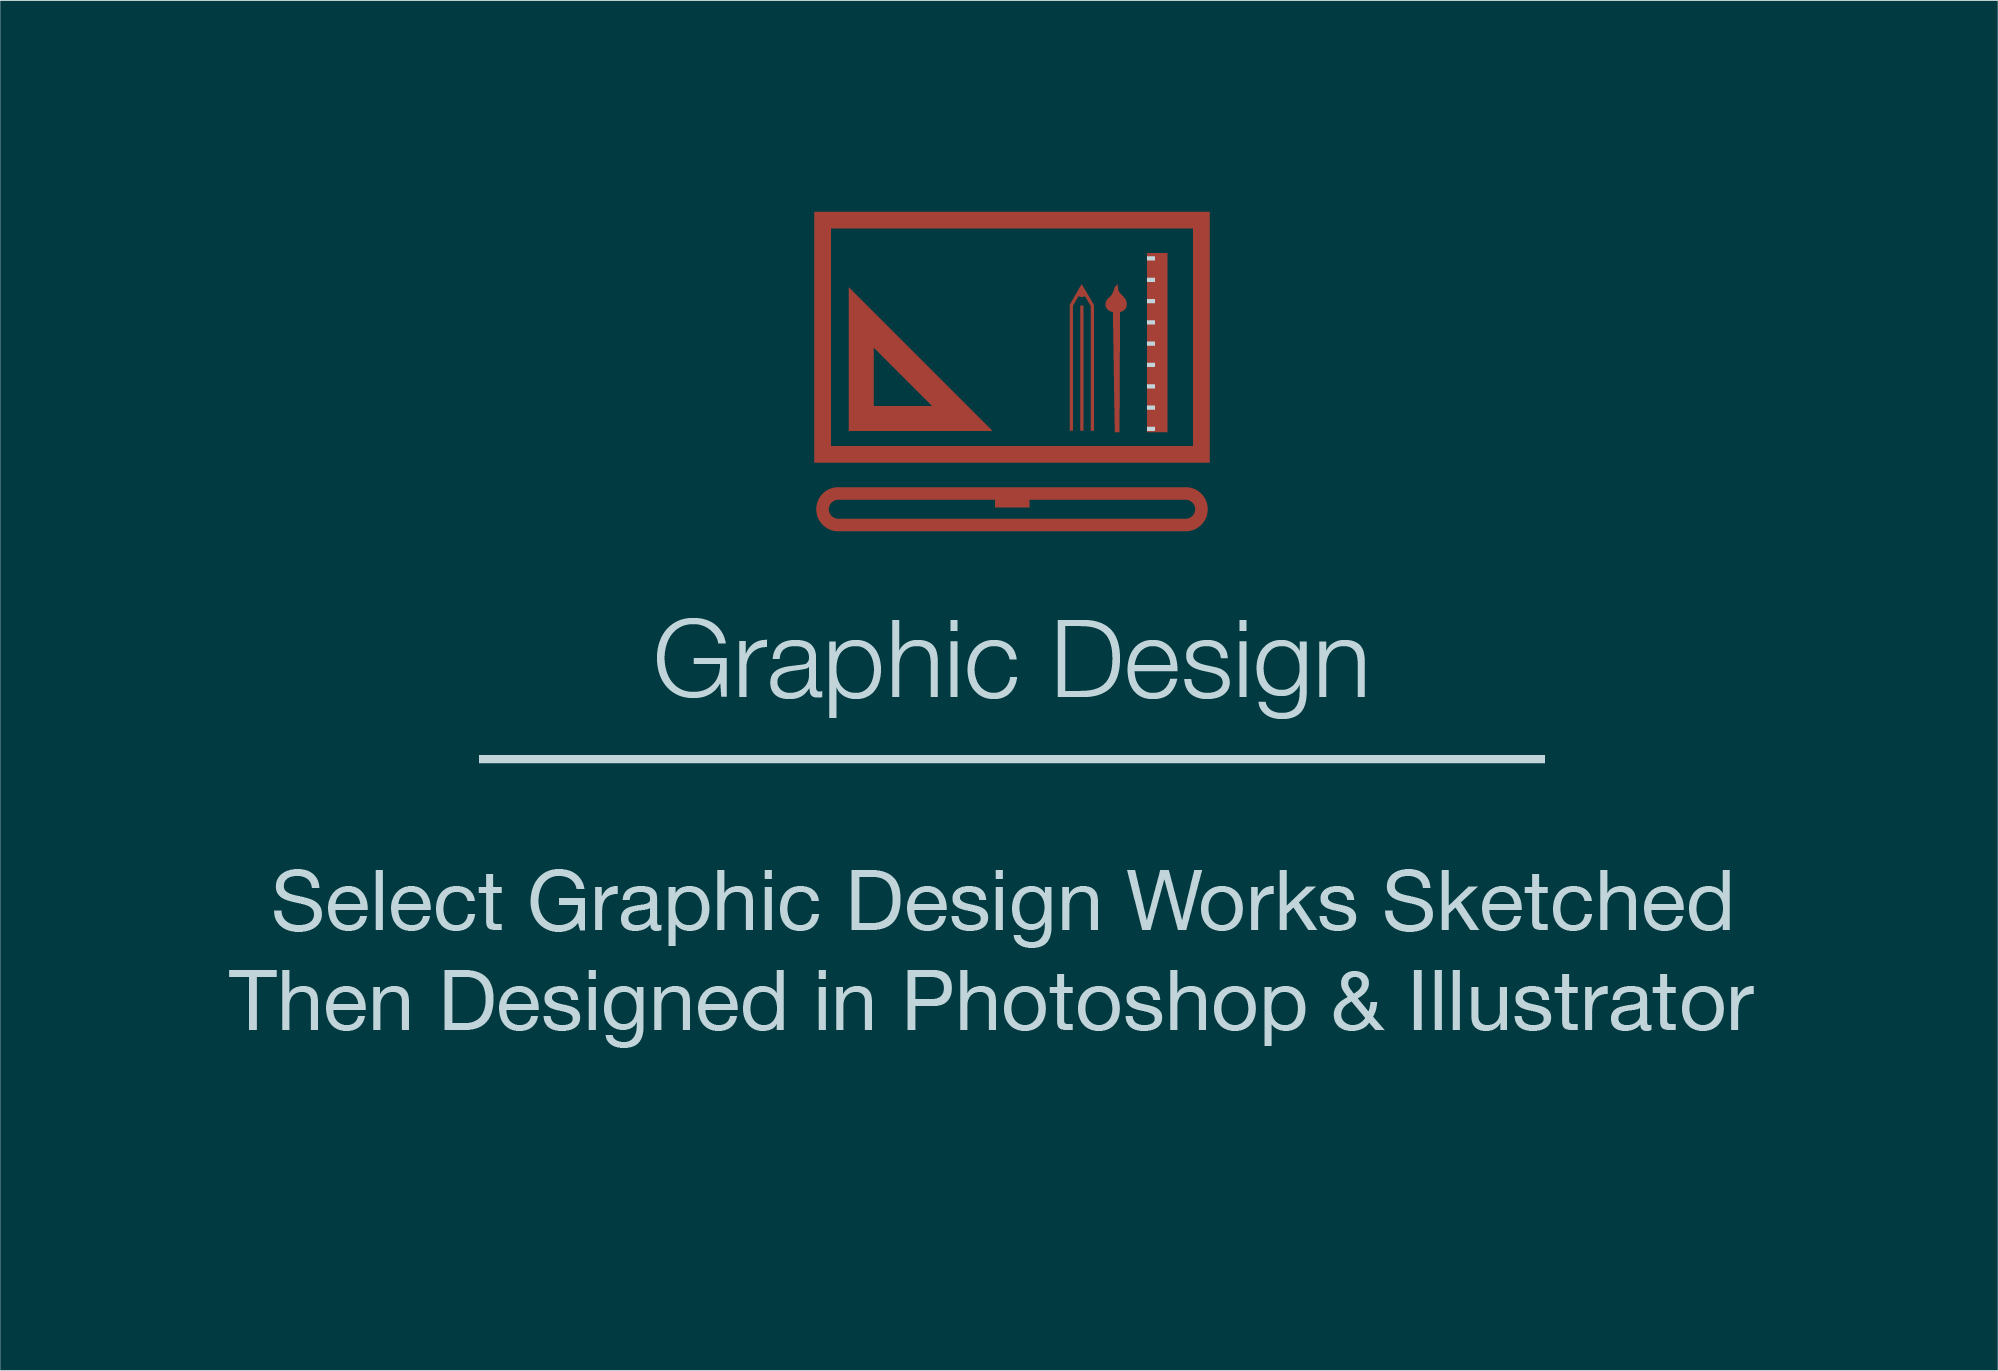 Select graphic design works first sketched and then designed in Adobe photoshop and / or illustrator.